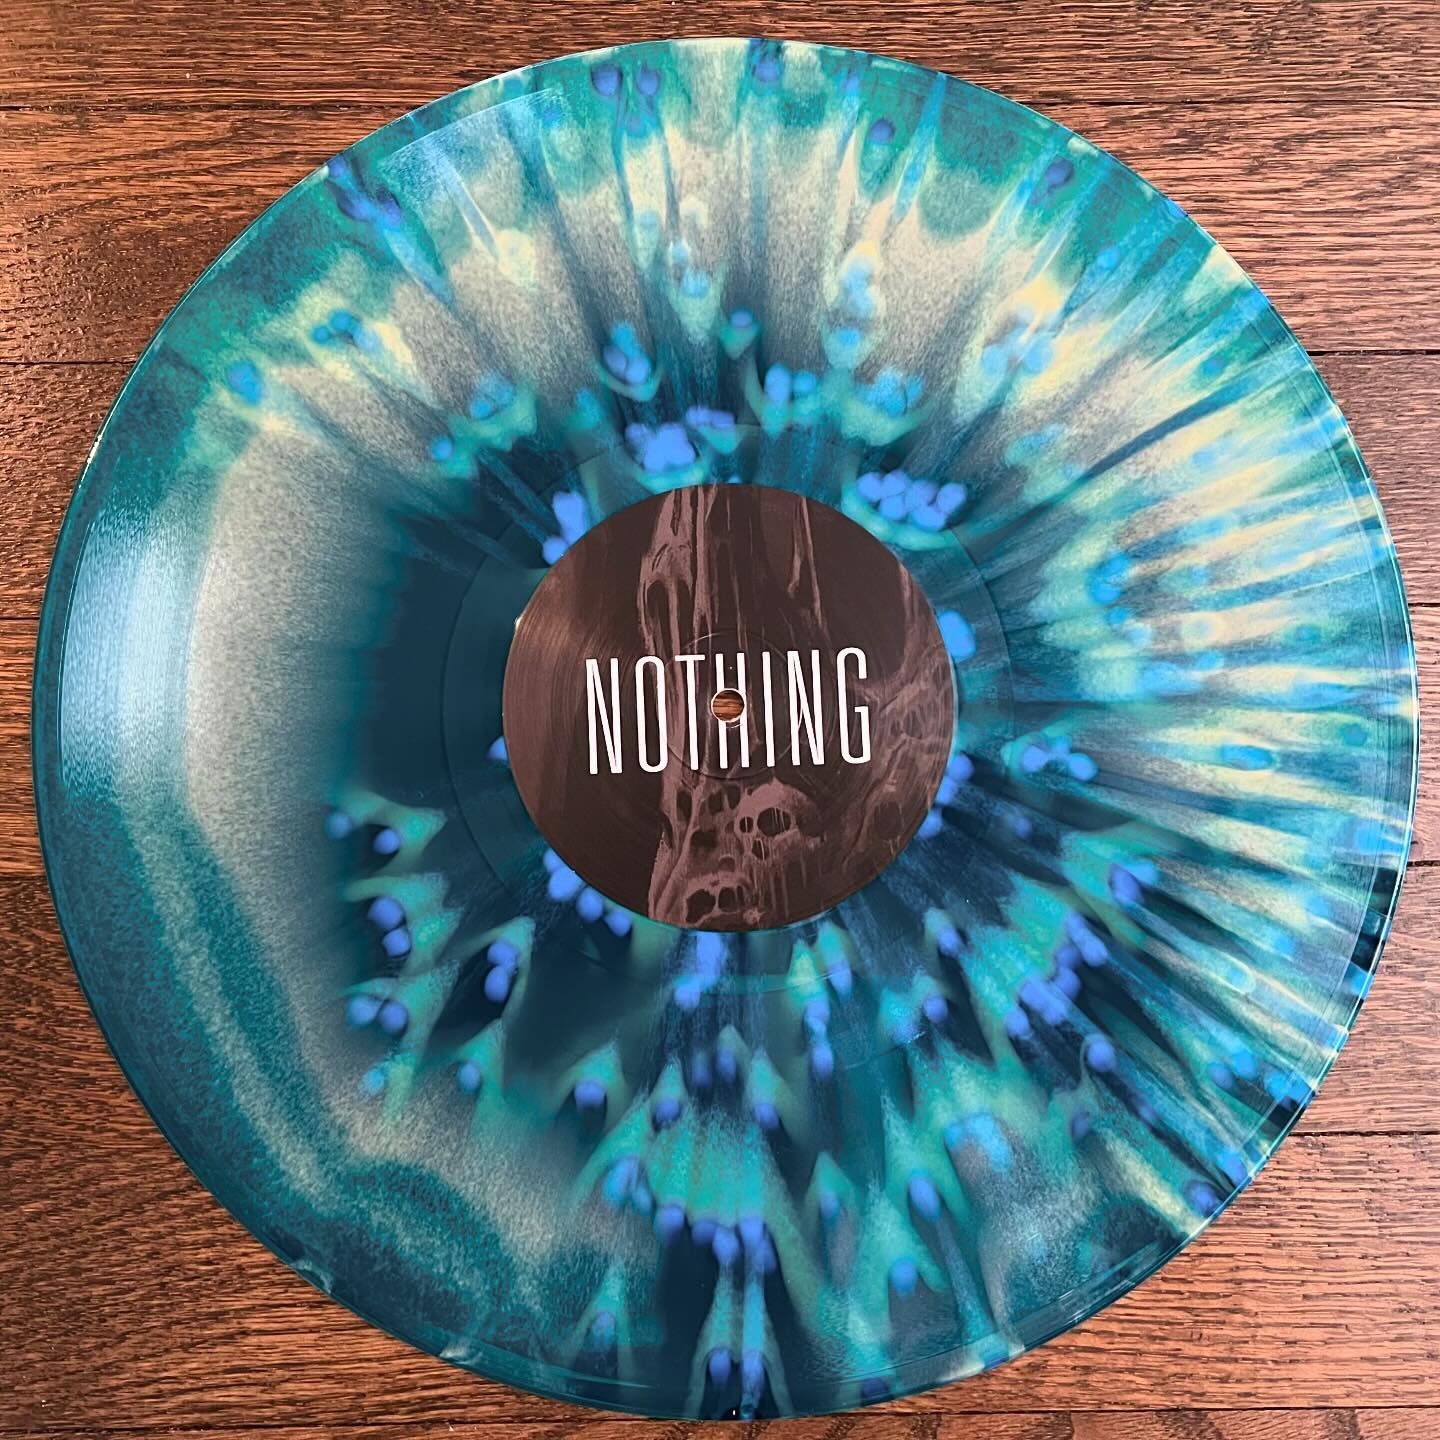 Limited Show Only Color Empty 2LP will be available this Friday, May 3 at @metrochicago along with new merch designs. Tickets available via our bio link.